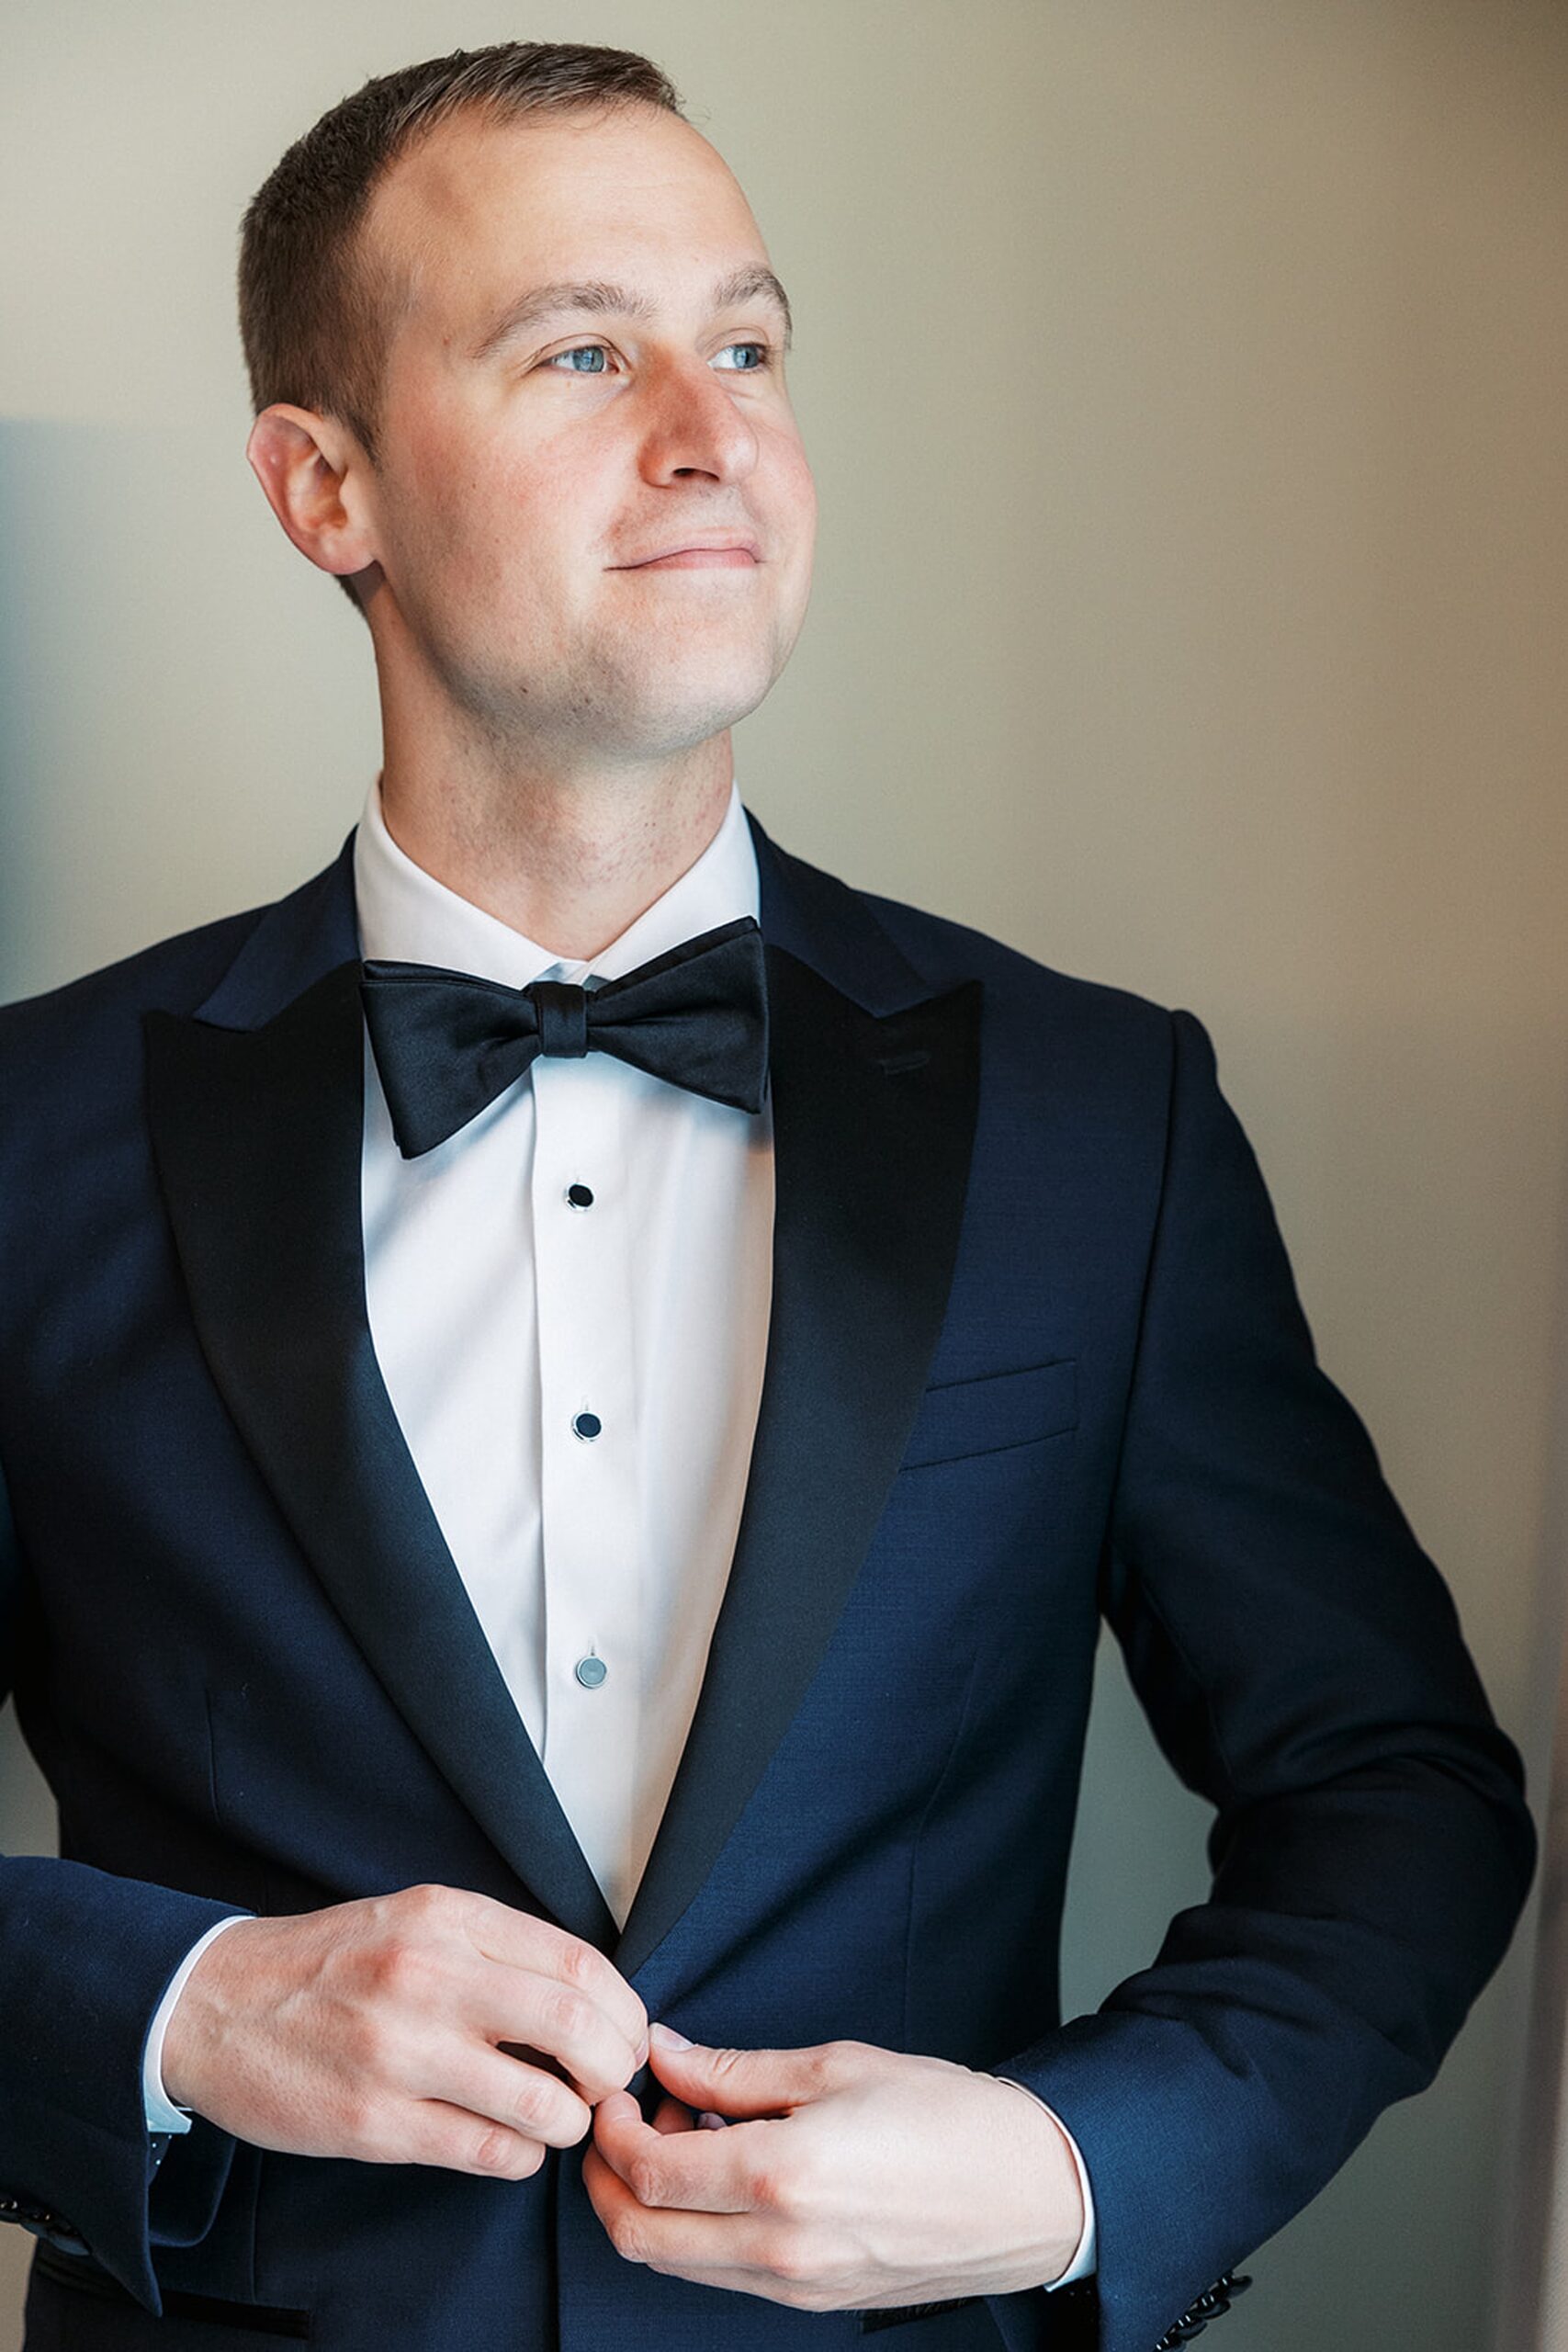 A groom buttons his black jacket while looking out a window